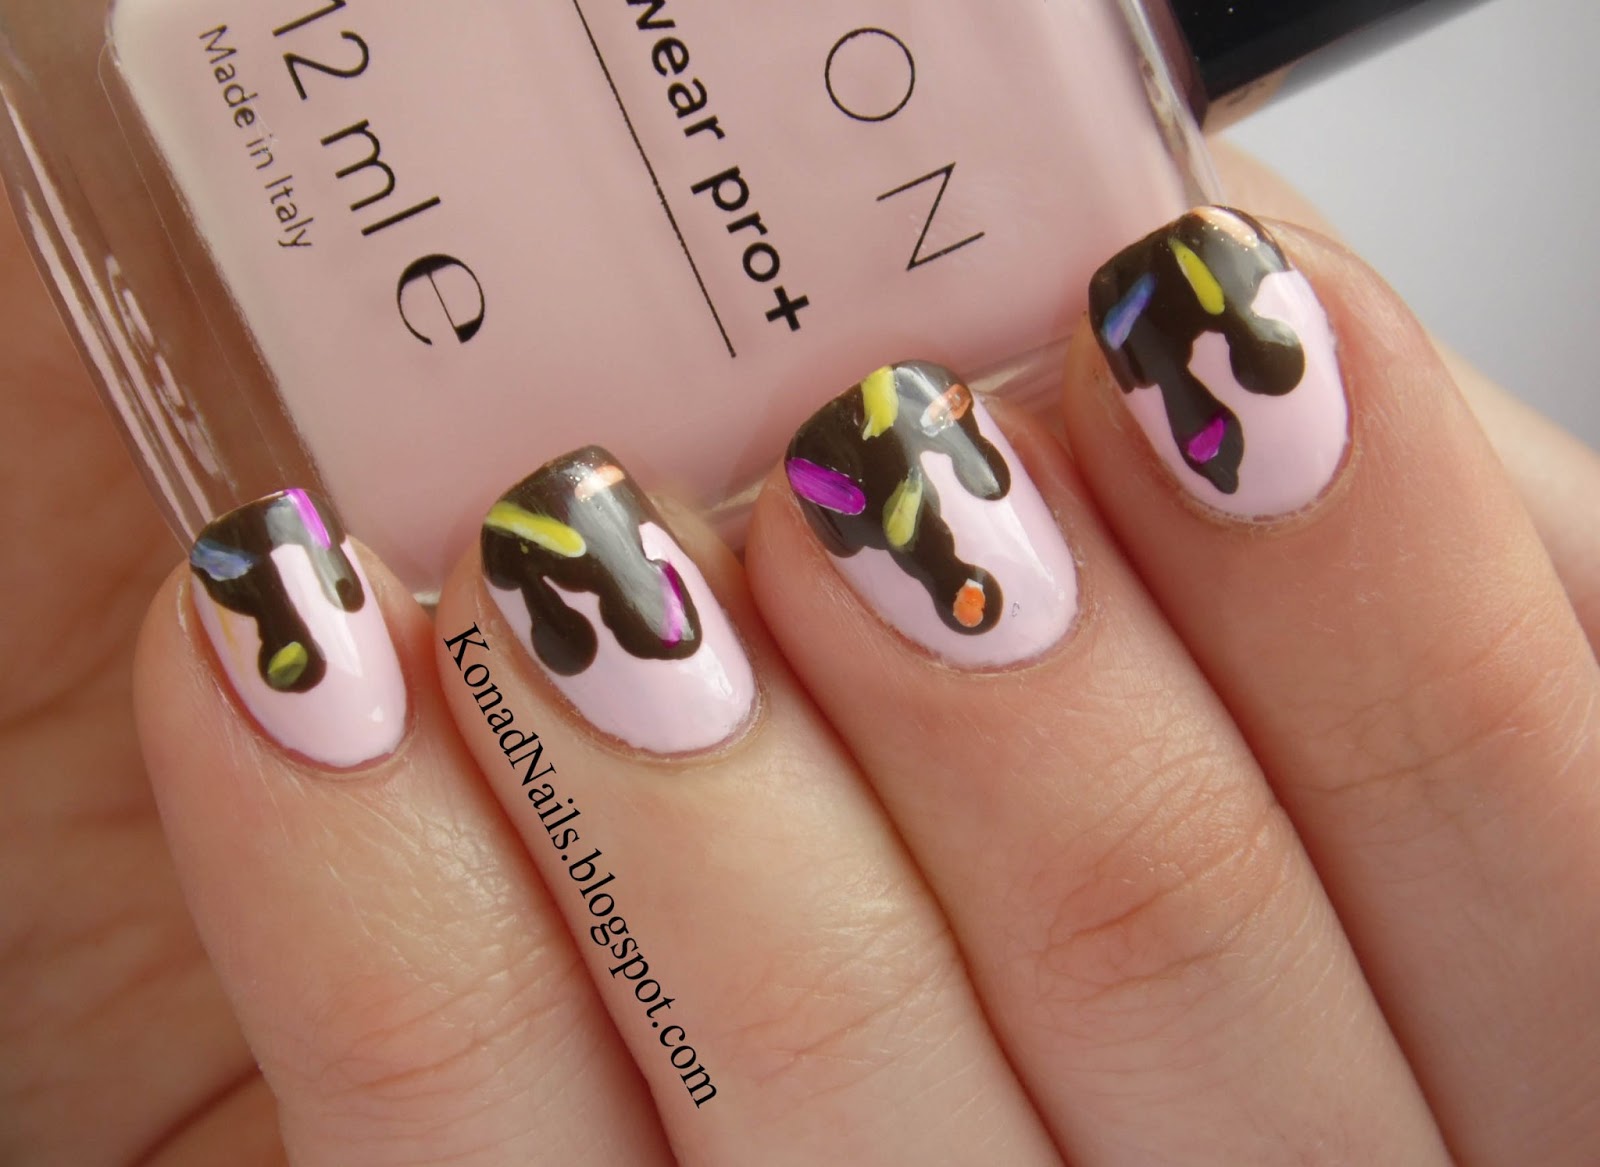 Chocolate Sauce and Sprinkles Nail Art Ideas - wide 8